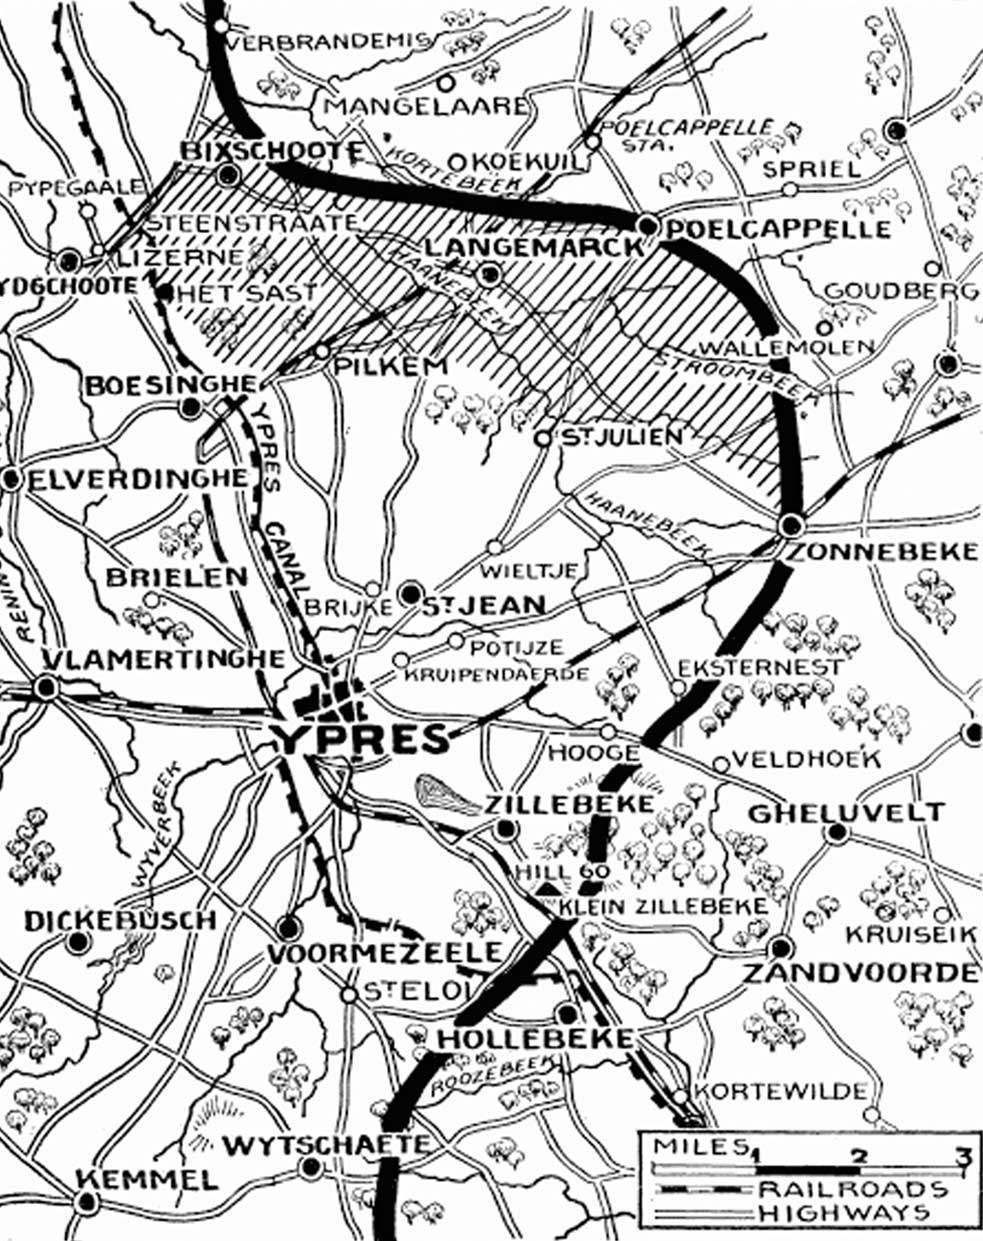 30th April - Positions before the British pullback